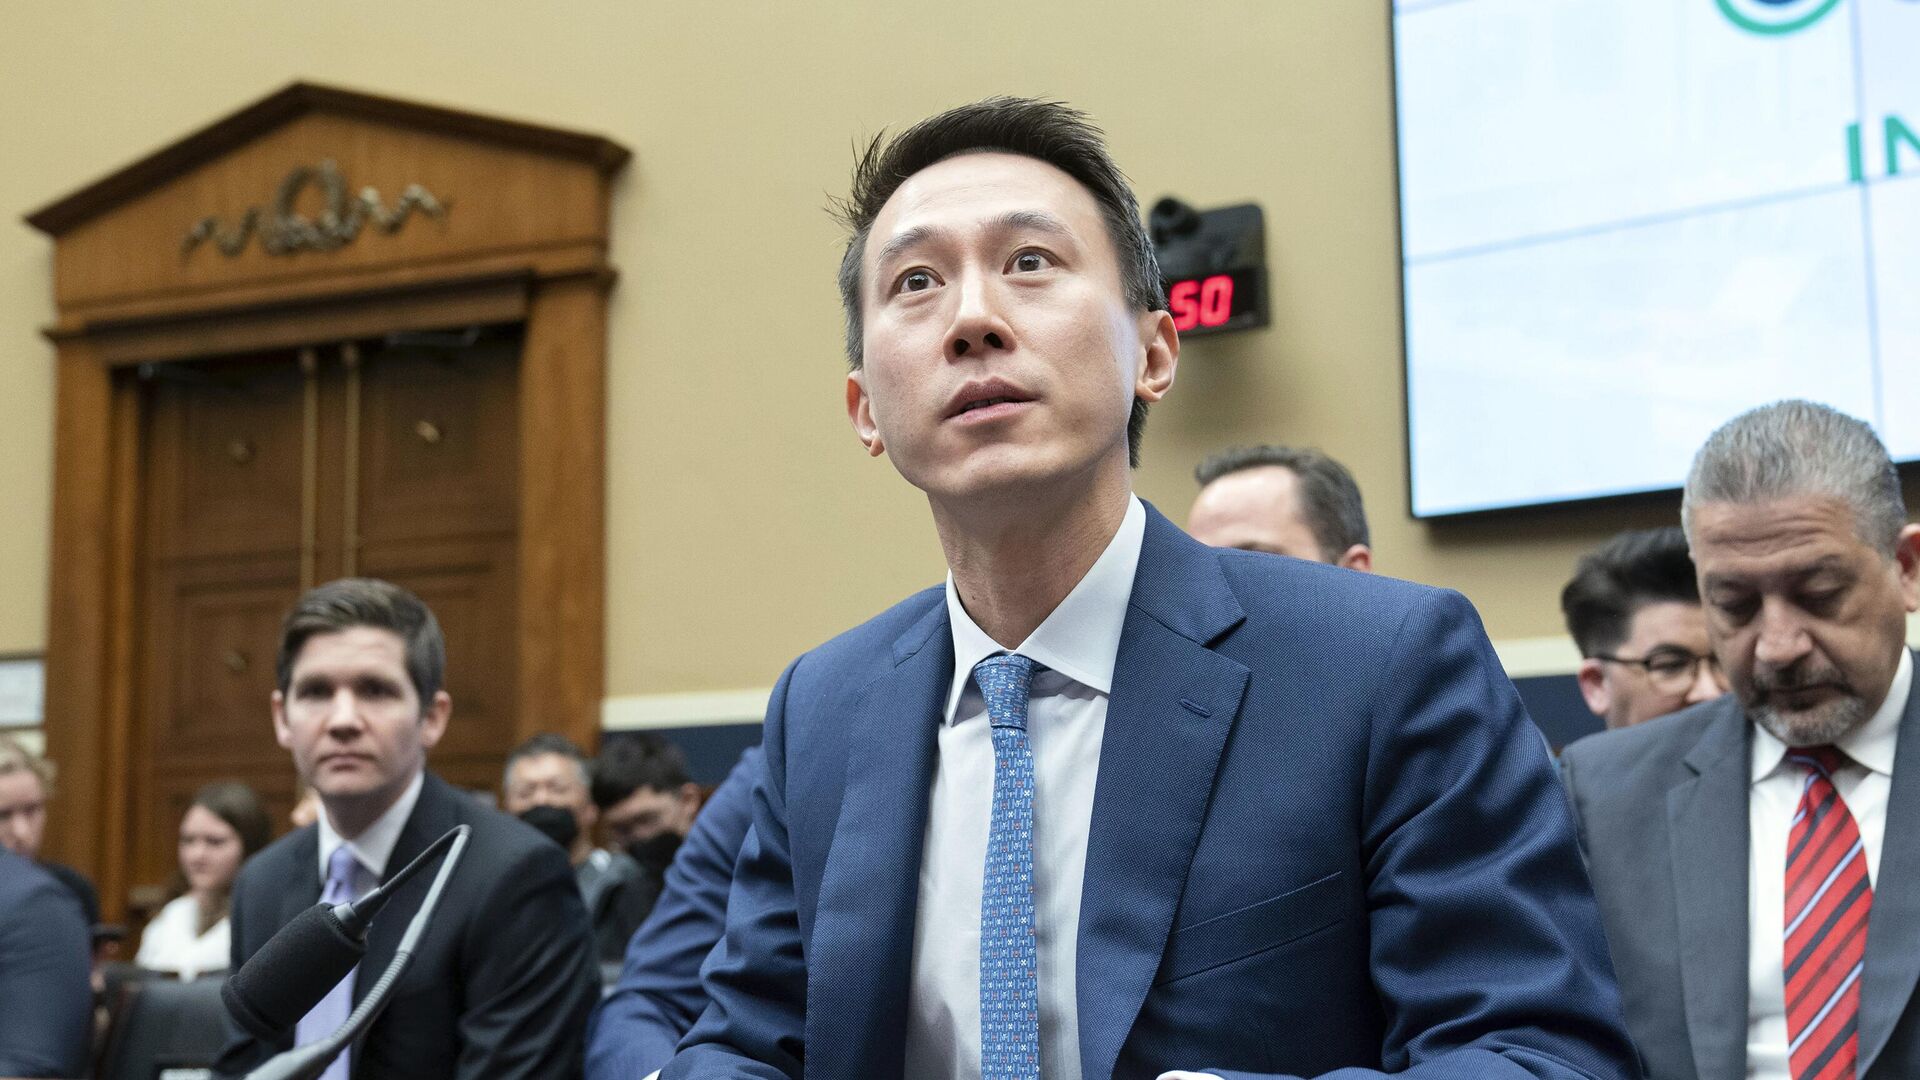 TikTok CEO Shou Zi Chew testifies during a hearing of the House Energy and Commerce Committee - Sputnik International, 1920, 24.03.2023